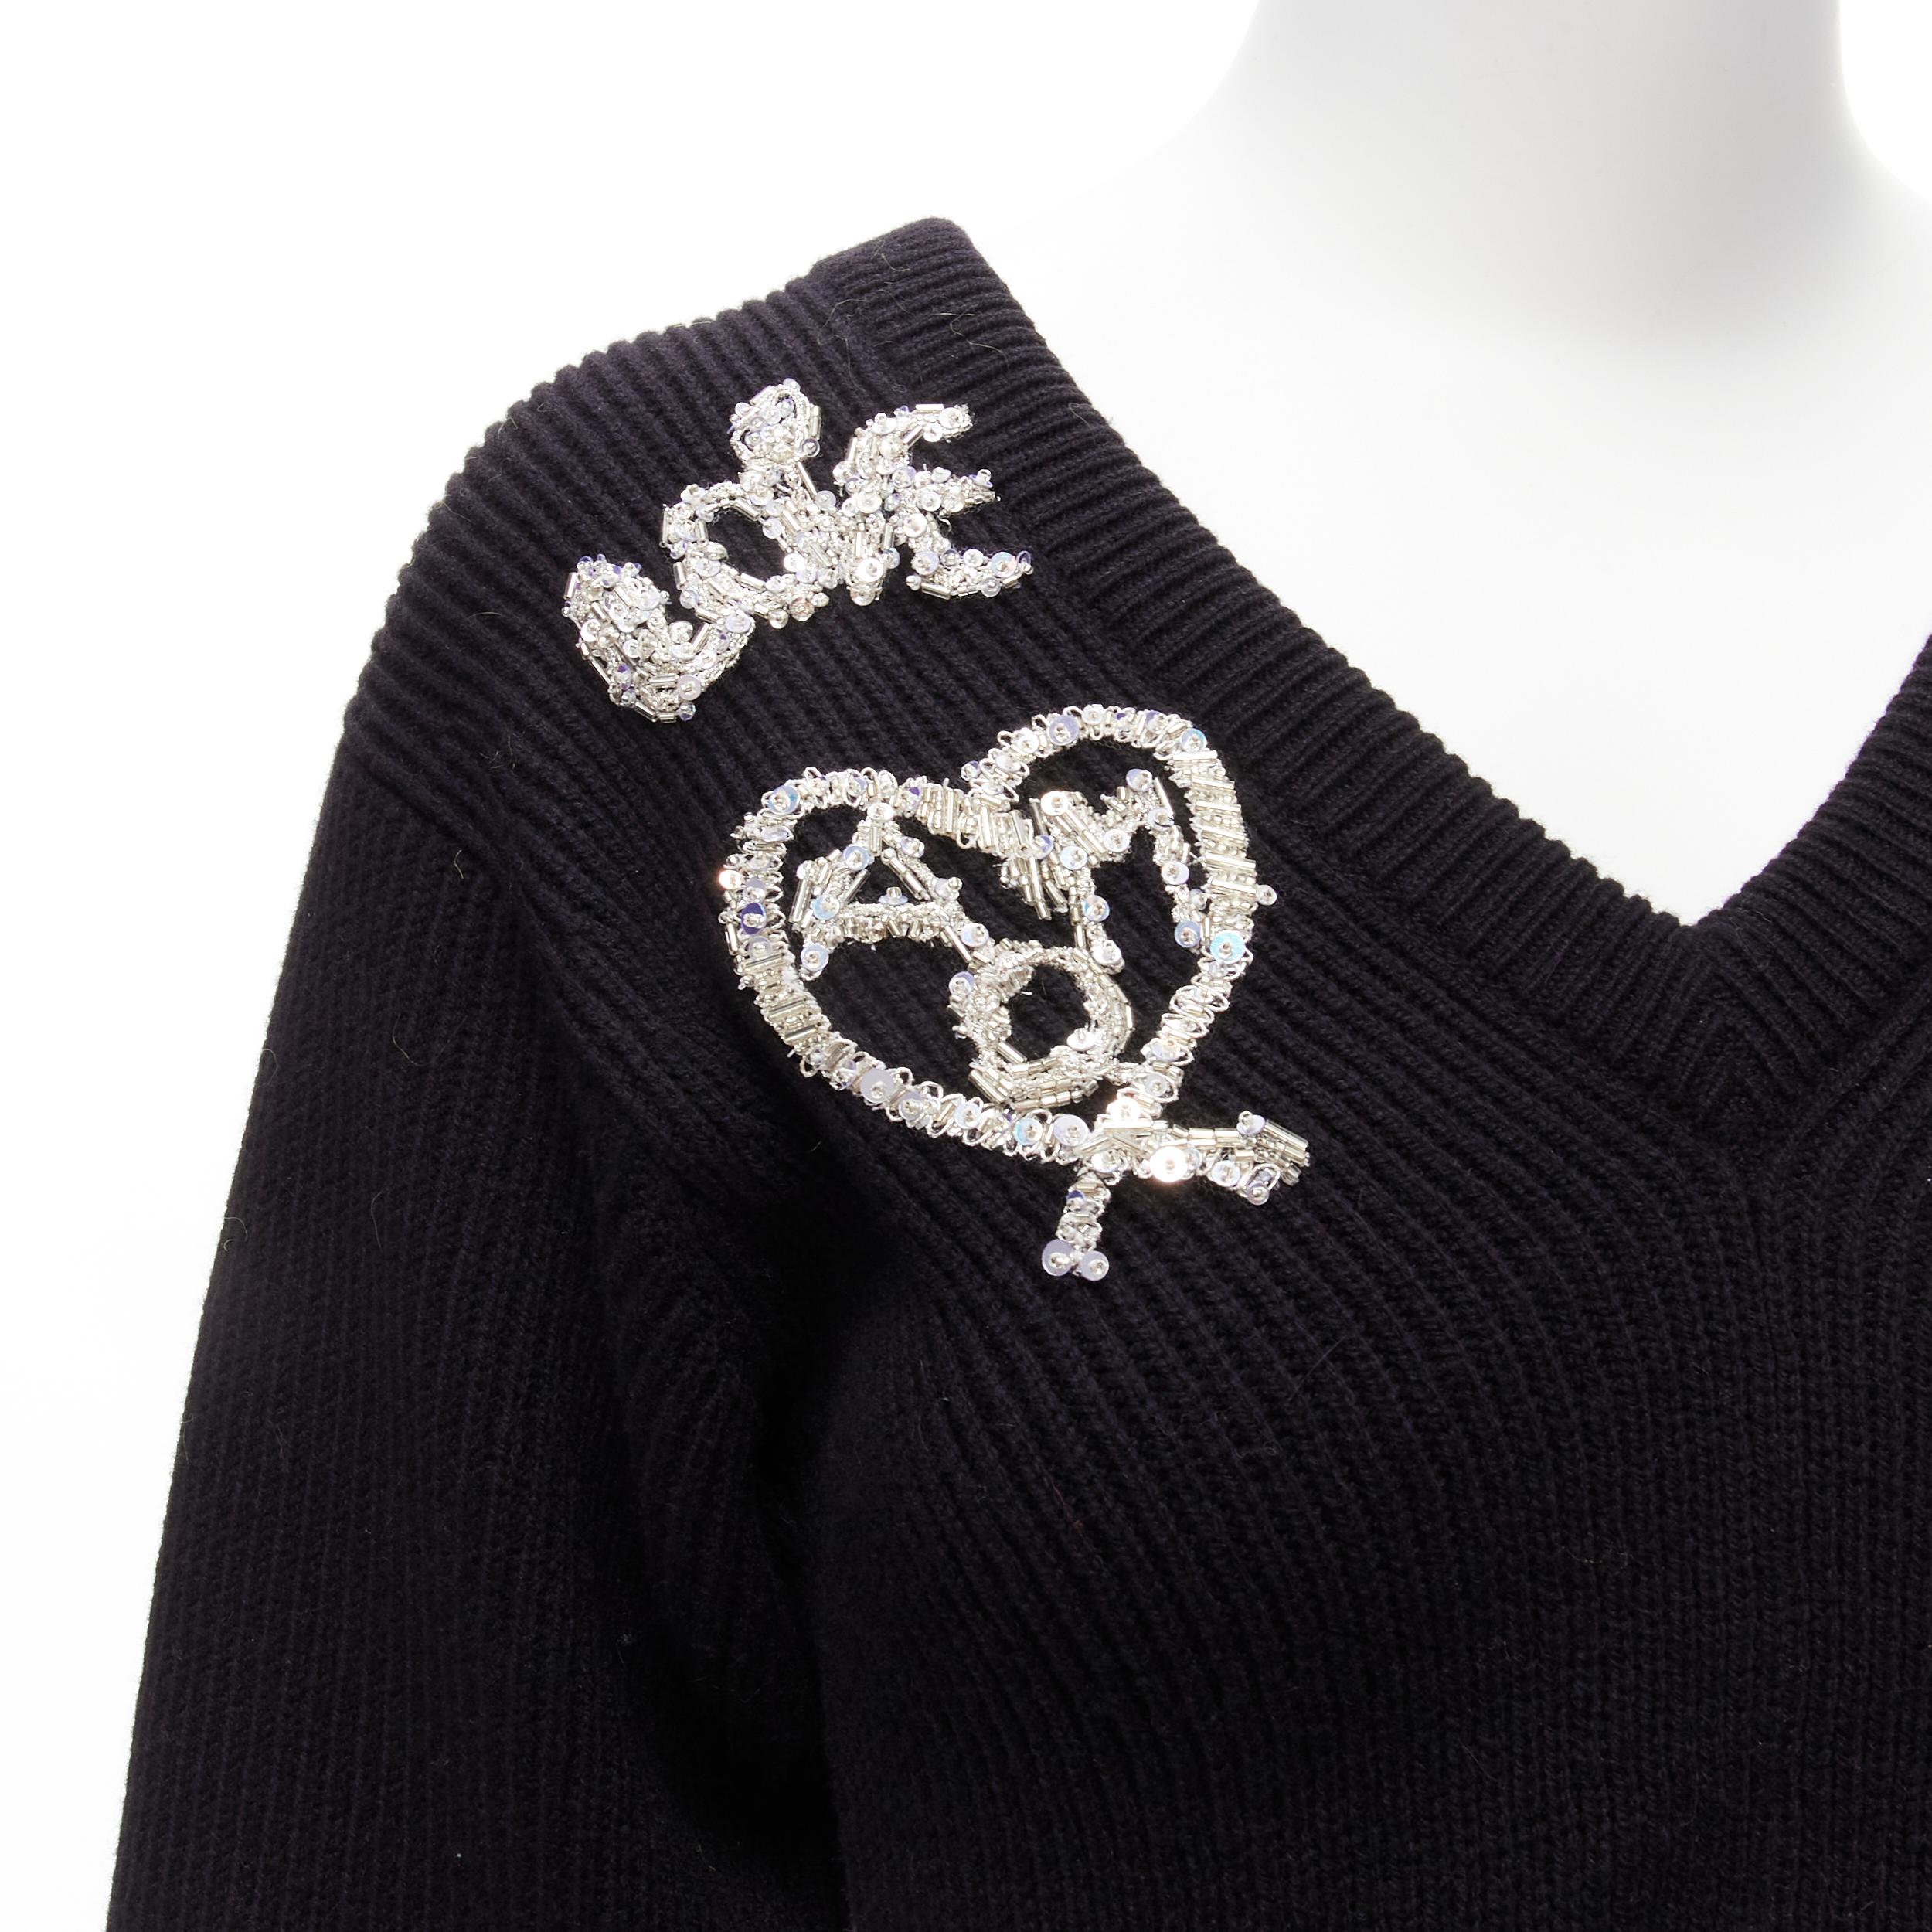 ALEXANDER MCQUEEN 2022 black logo beads embellished peplum ribbed sweater S
Reference: AAWC/A00473
Brand: Alexander McQueen
Designer: Sarah Burton
Collection: 2022
Material: Wool
Color: Black, Silver
Pattern: Solid
Closure: Pullover
Made in: